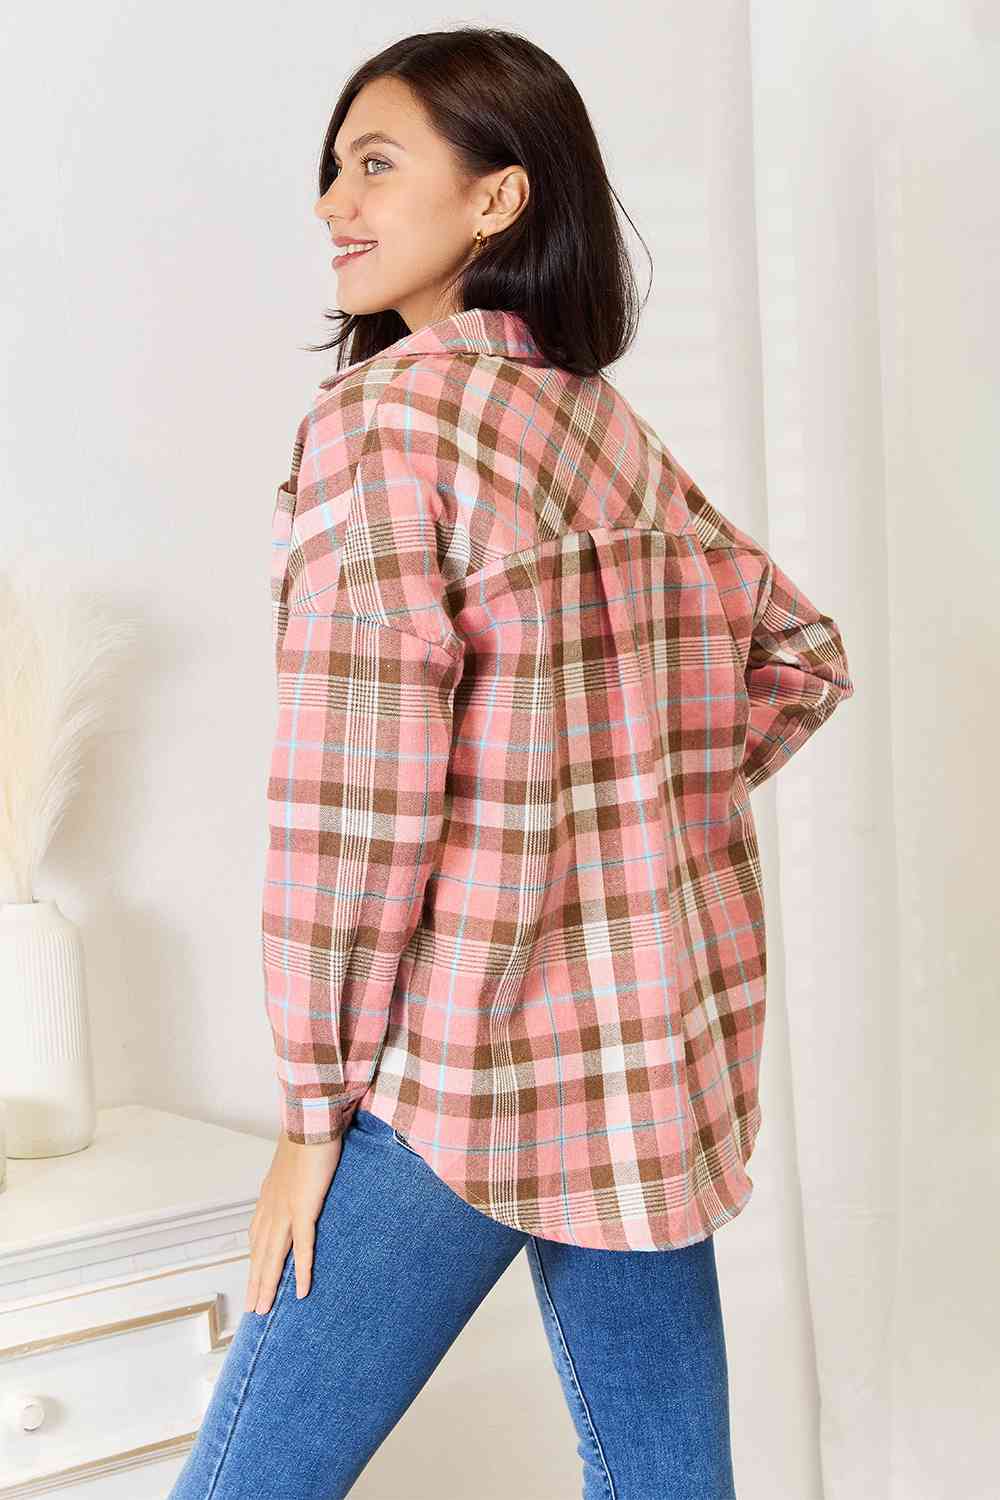 Light Gray Double Take Plaid Collared Neck Long Sleeve Button-Up Shirt Sentient Beauty Fashions Apparel & Accessories